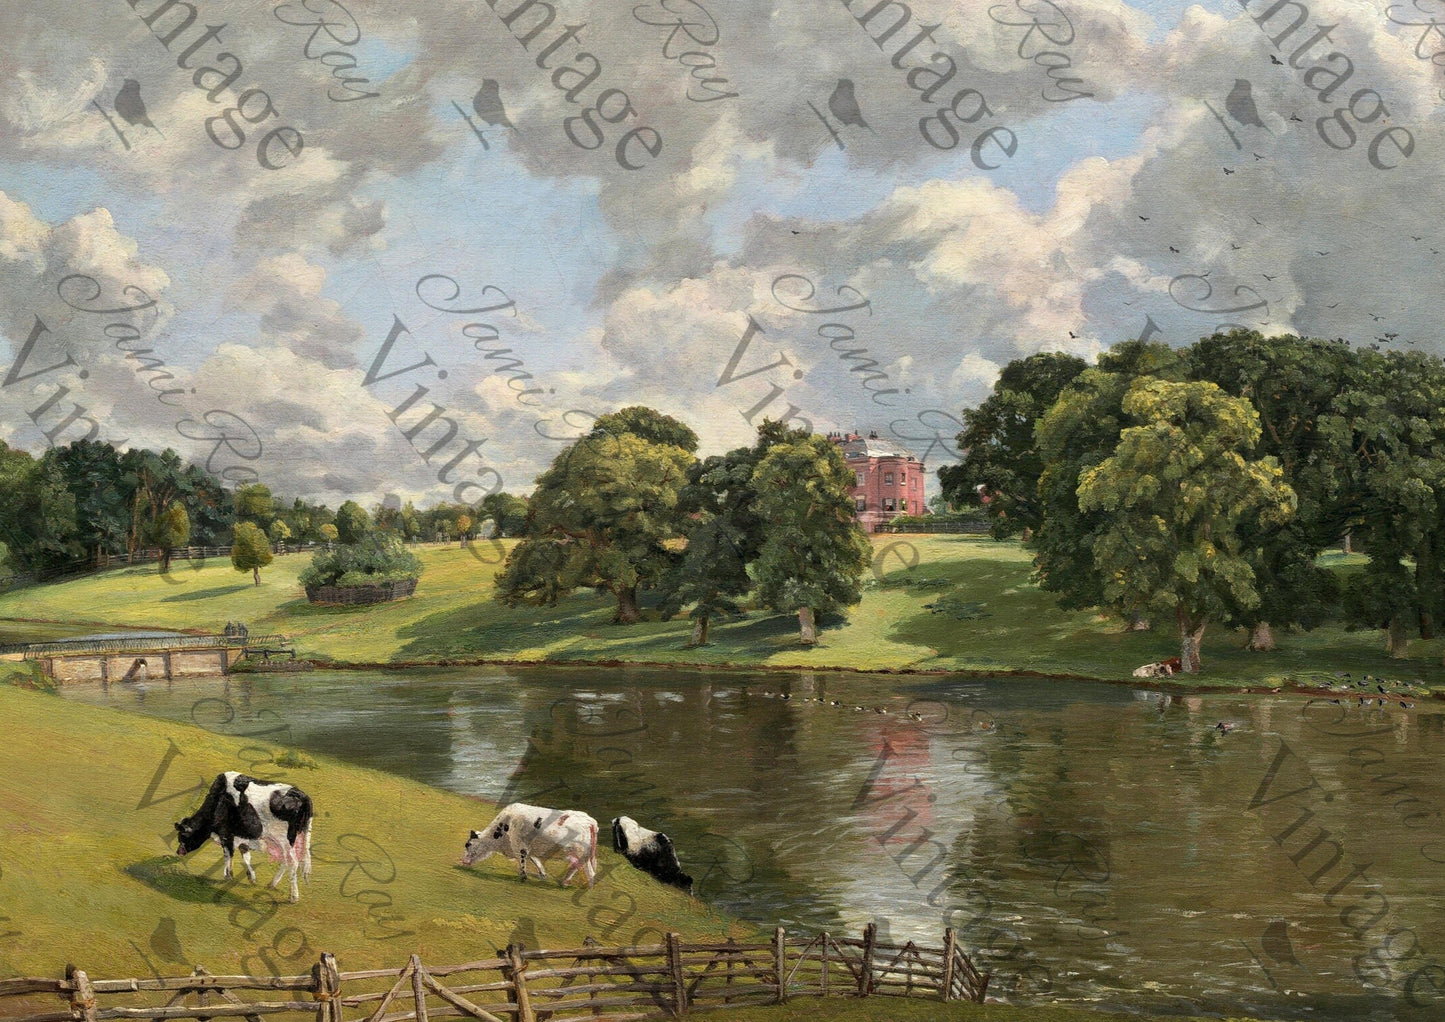 Cows By A River | JRV Rice Paper | A4